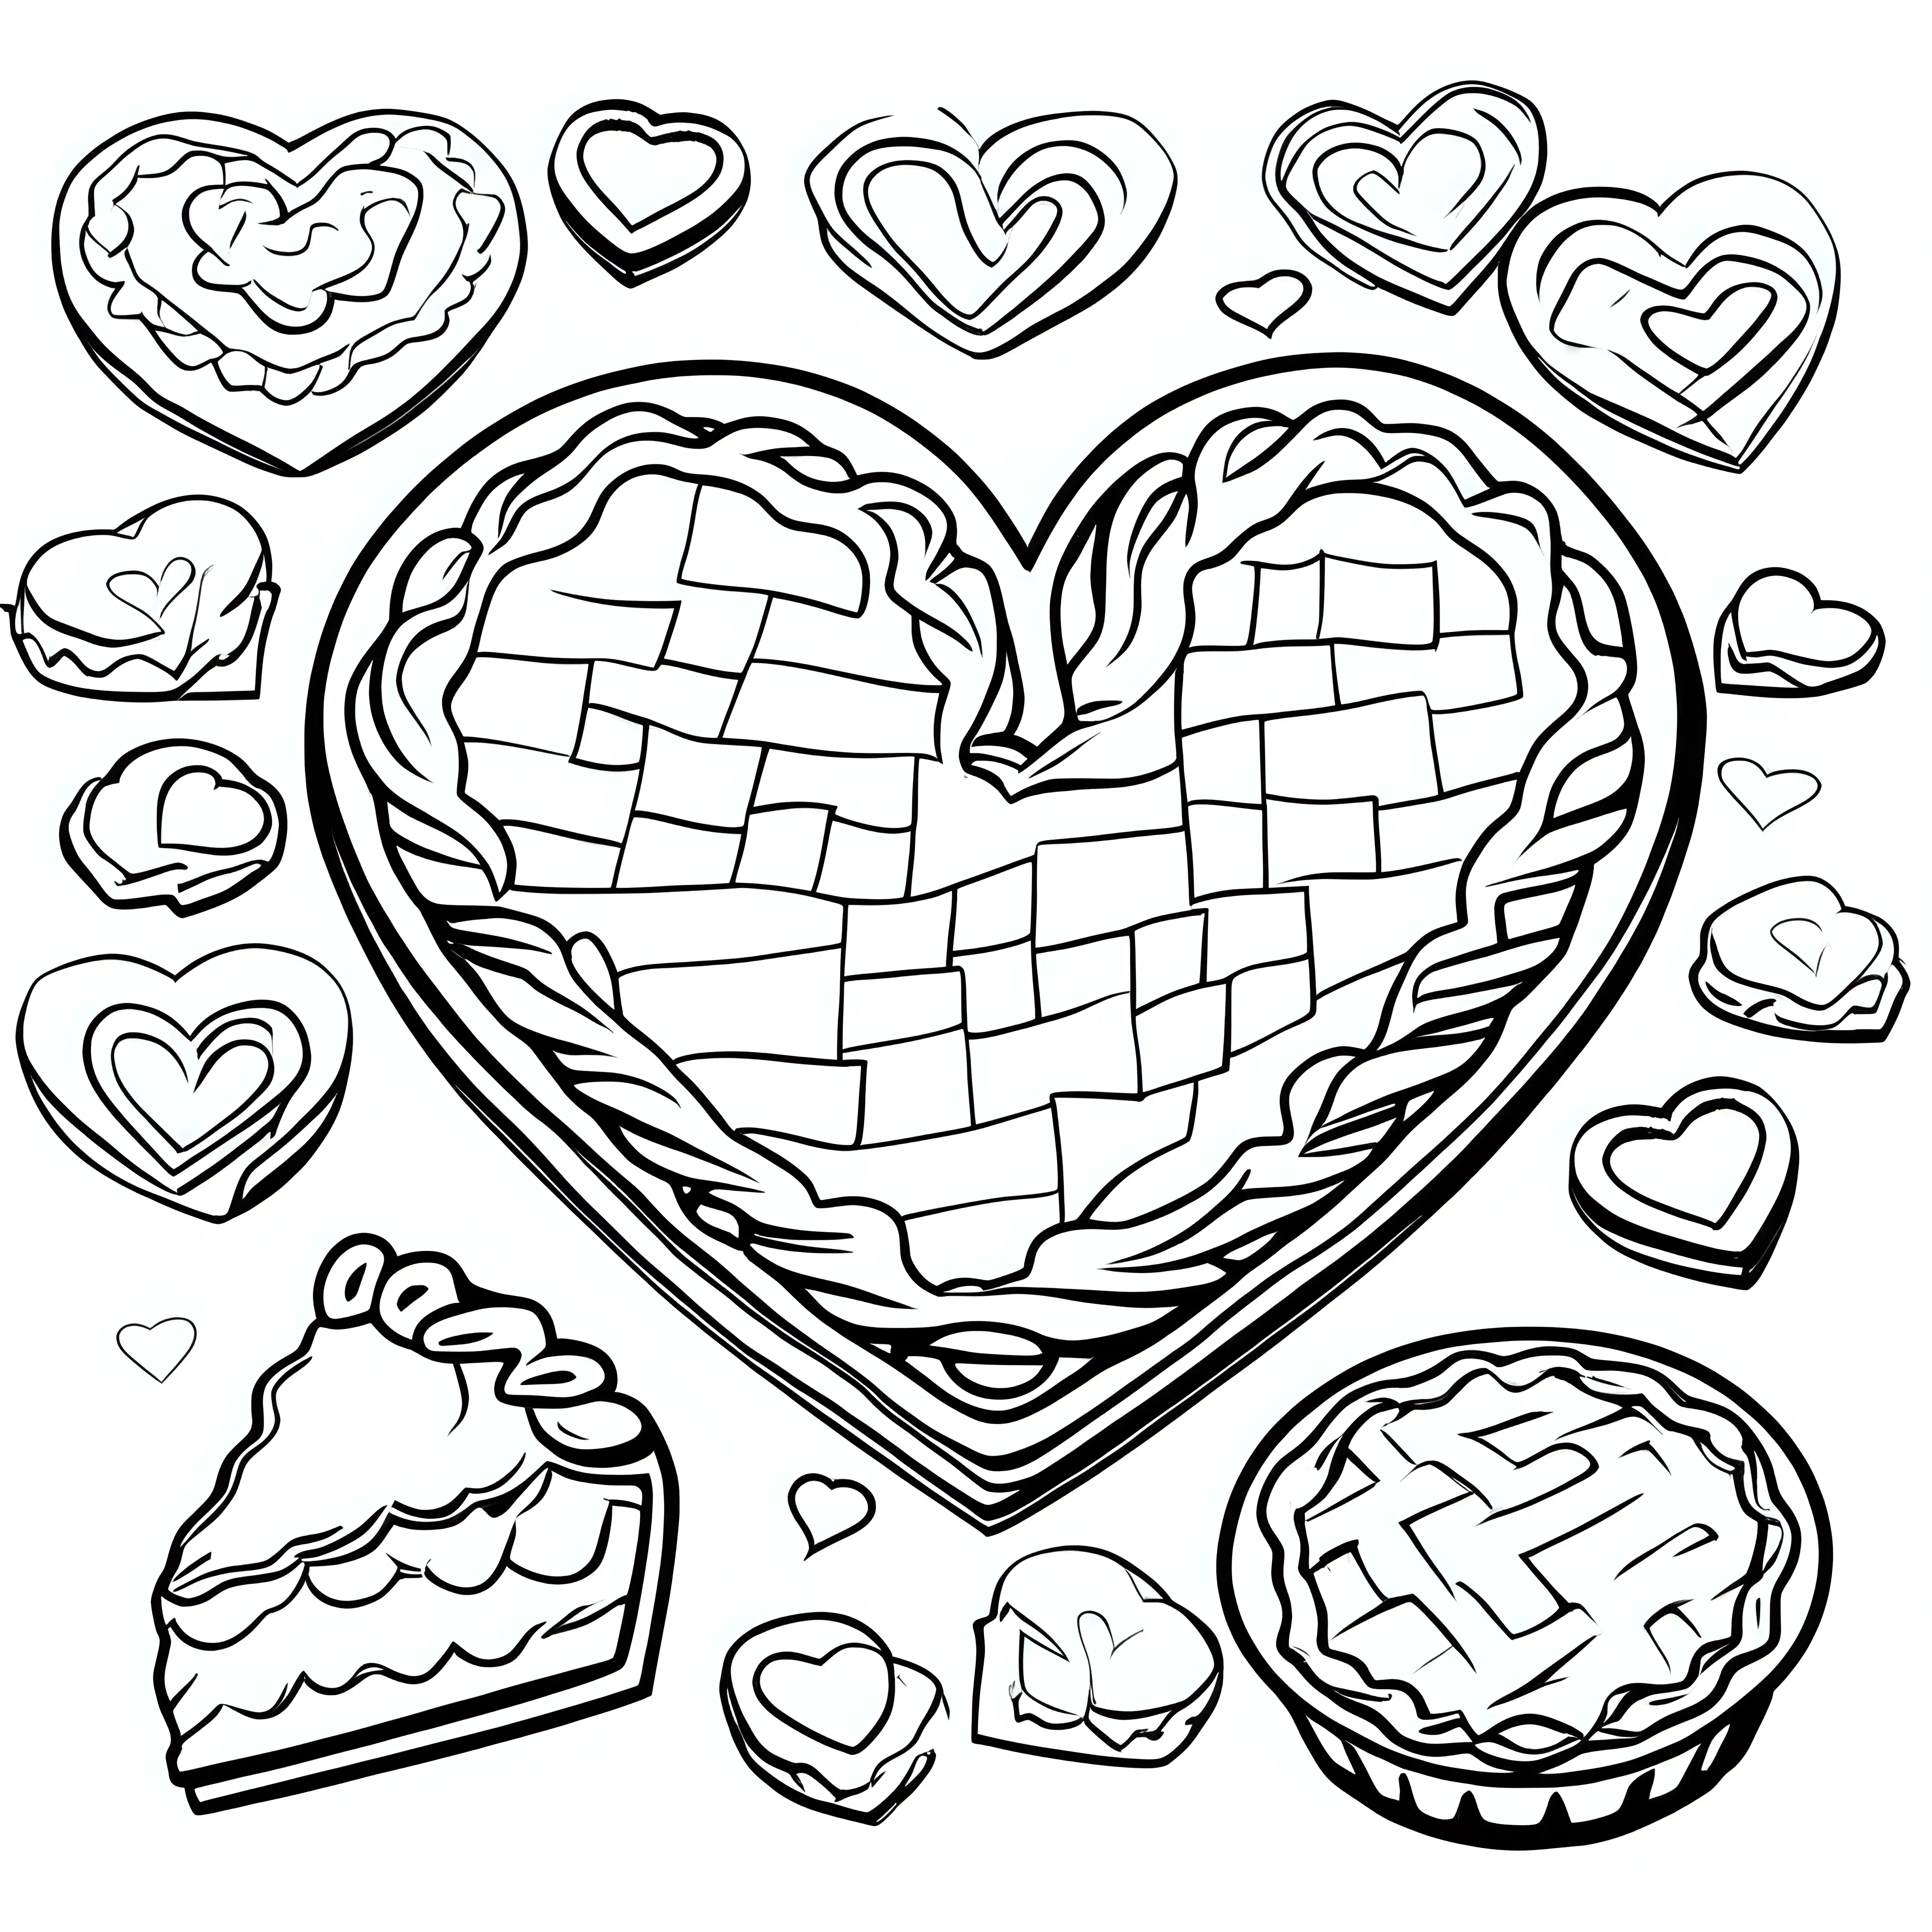 Create a coloring book page Valentine's Day Pie: Kids baking heart-shaped pies with delicious fillings. Use crisp lines and white background. Make it an easy-to-color design for children. --ar 17:22--model raw